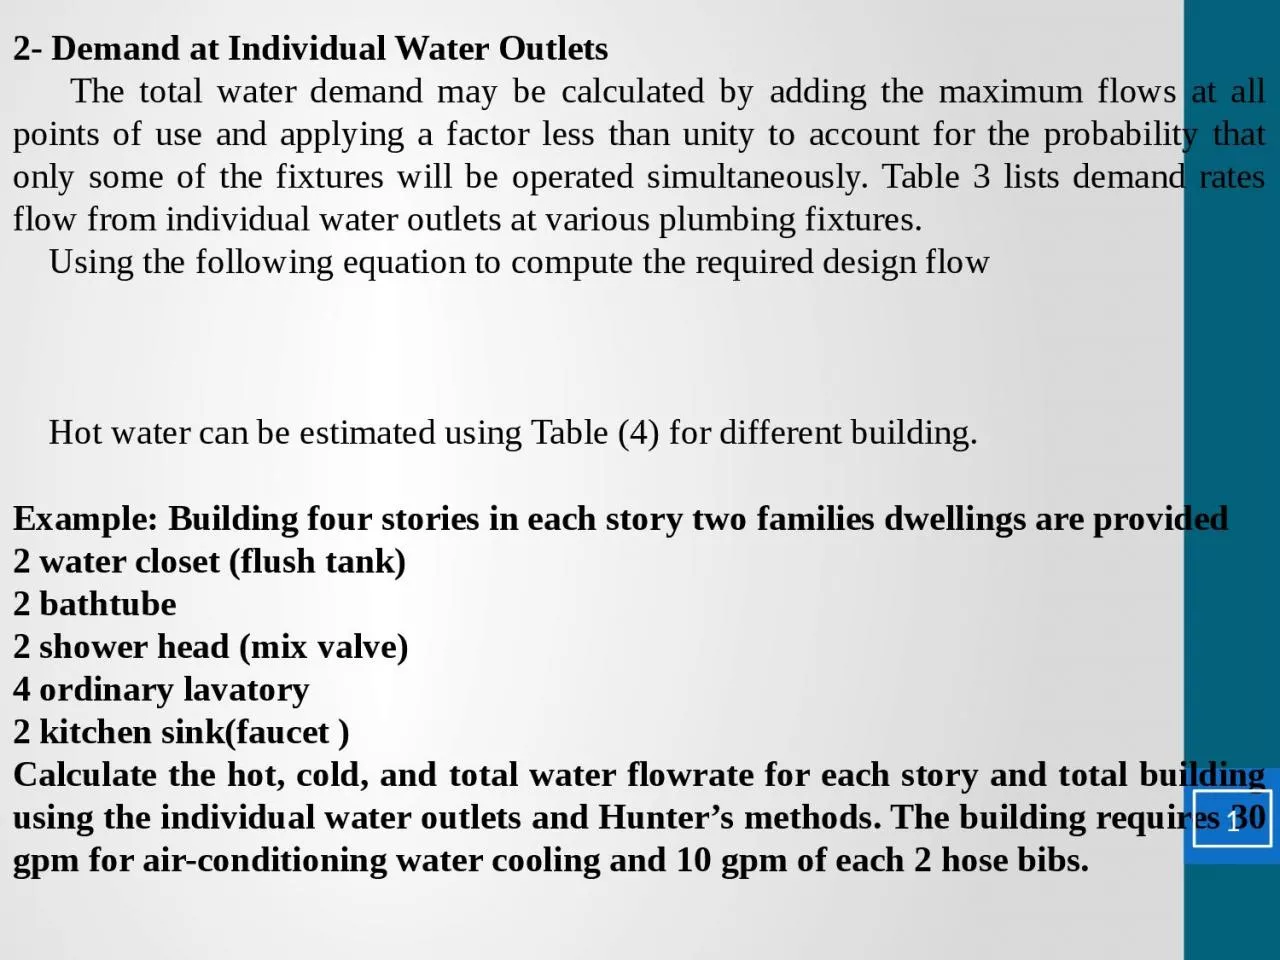 2- Demand at Individual Water Outlets